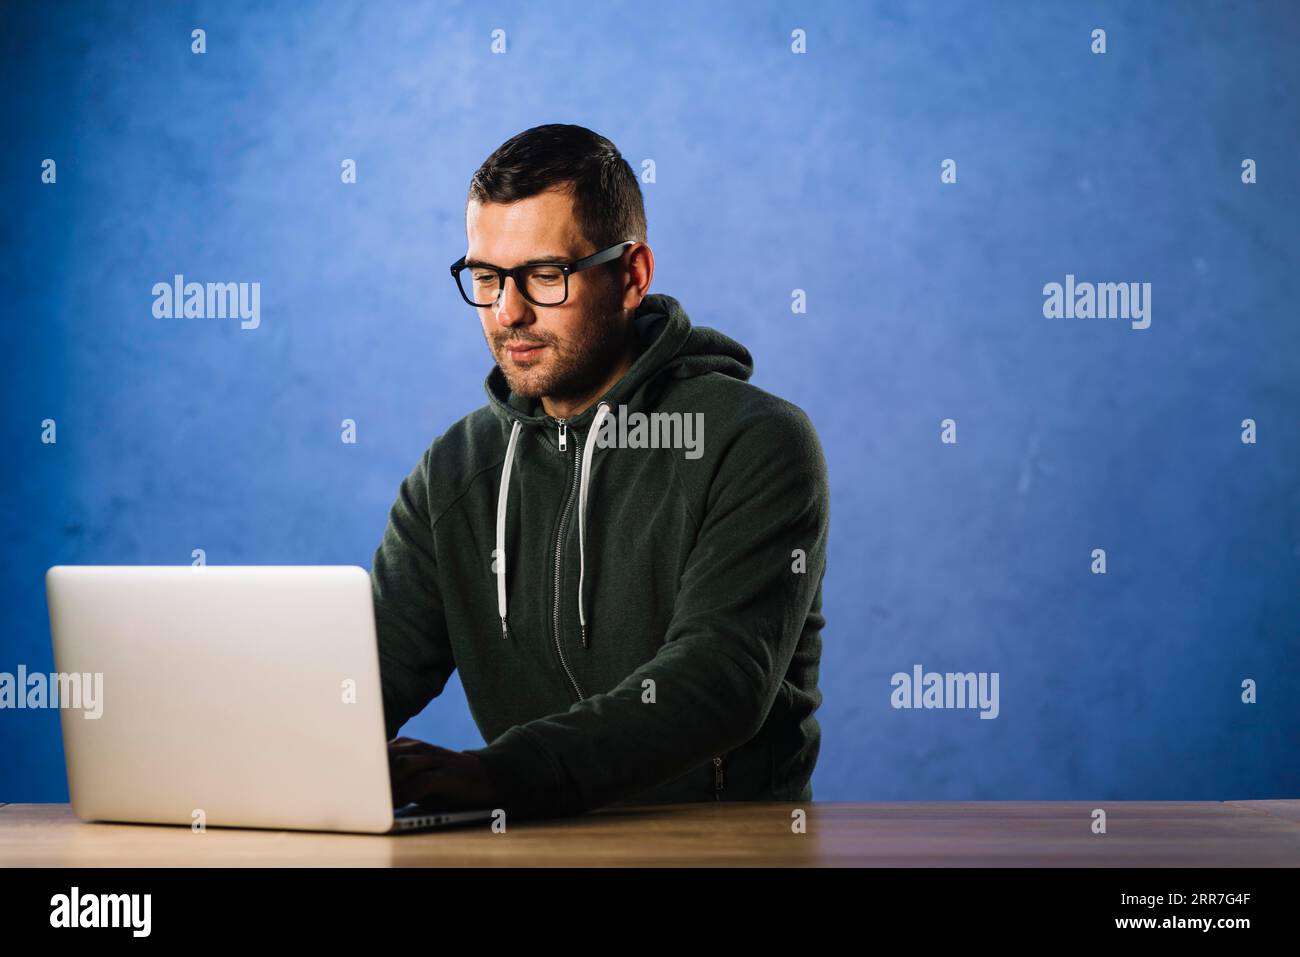 Hacker with glasses looking laptop Stock Photo